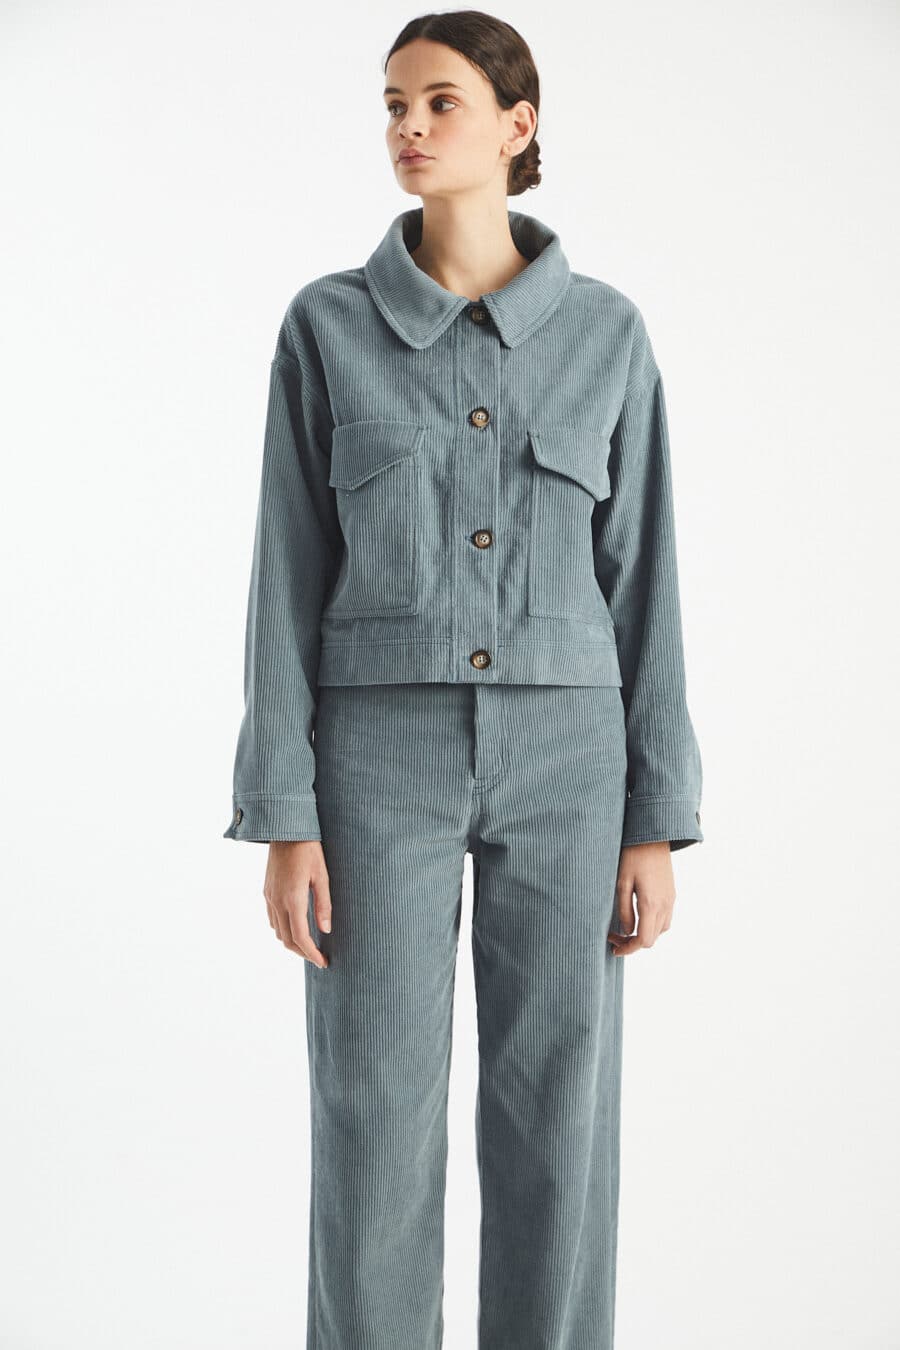 Peter Corduroy short jacket with pockets - Blue